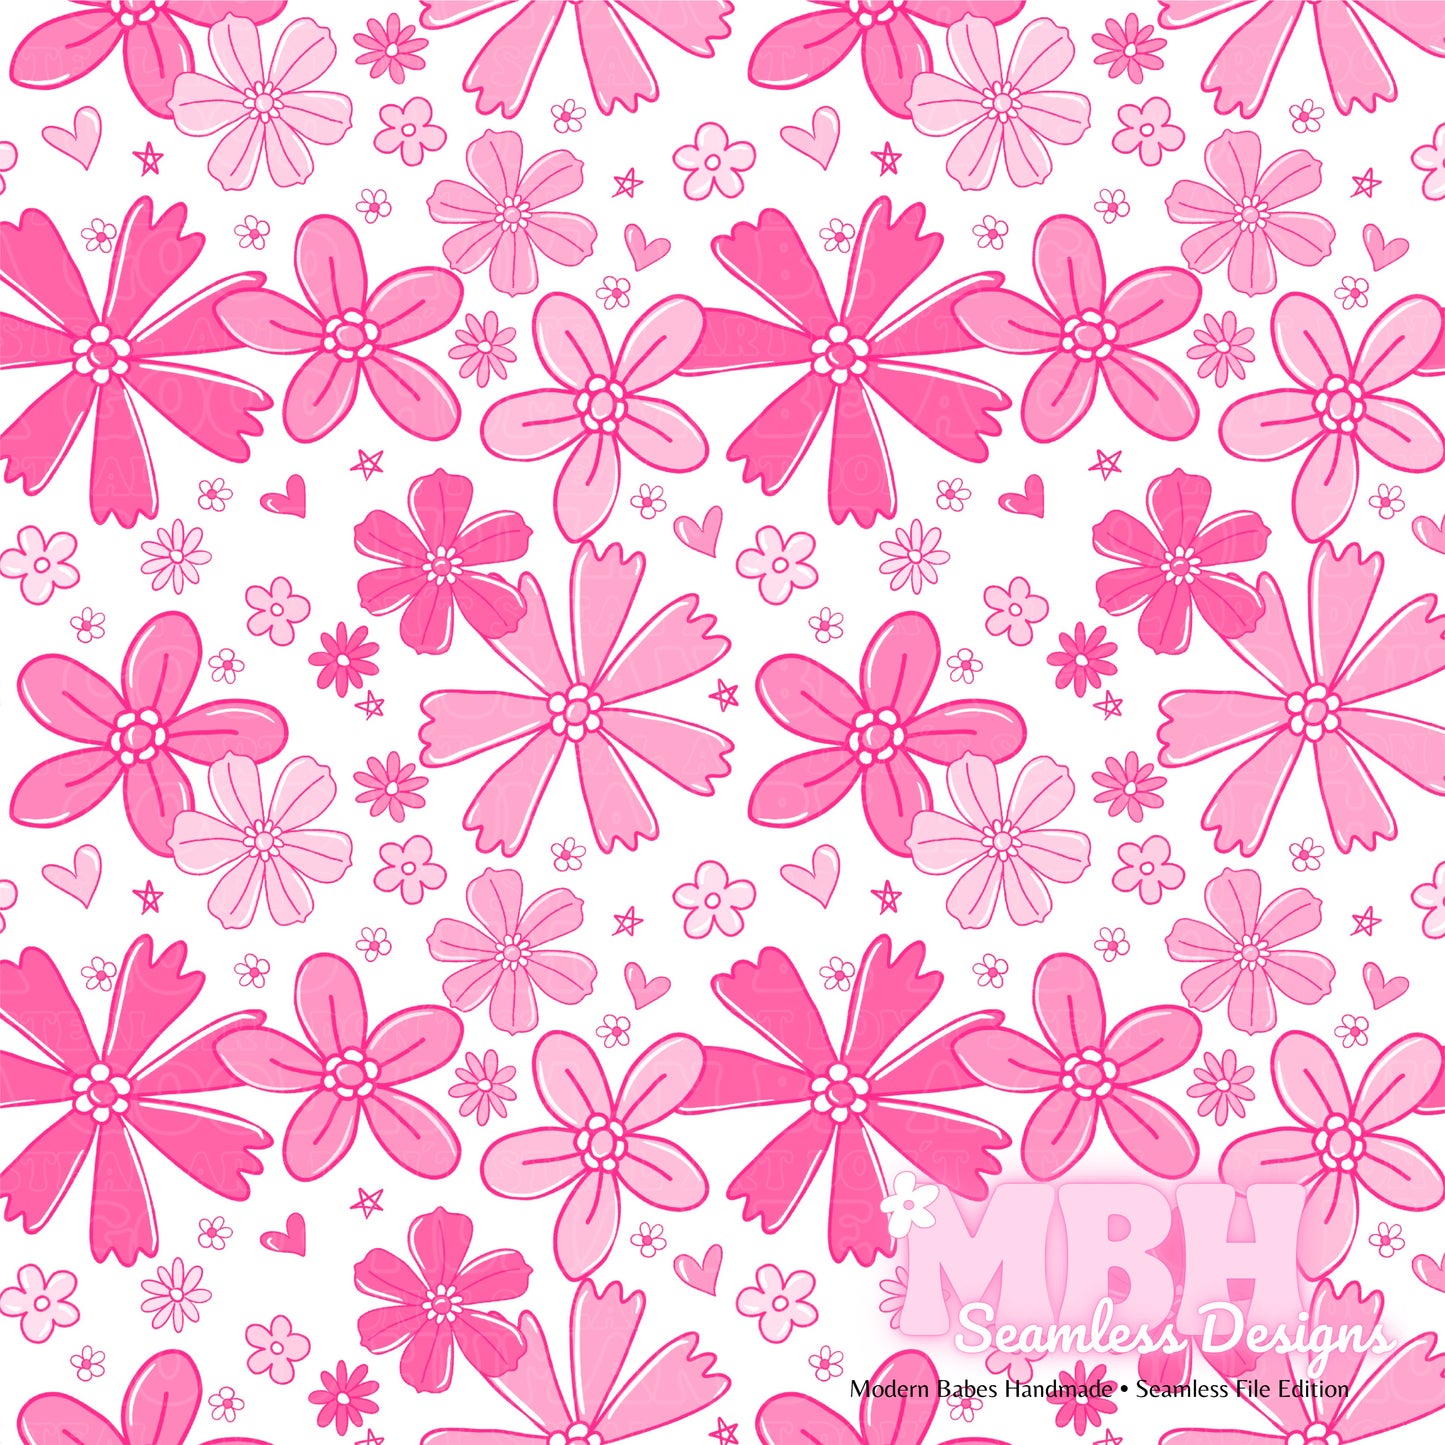 Bright Pink Floral Hearts Seamless Patterns